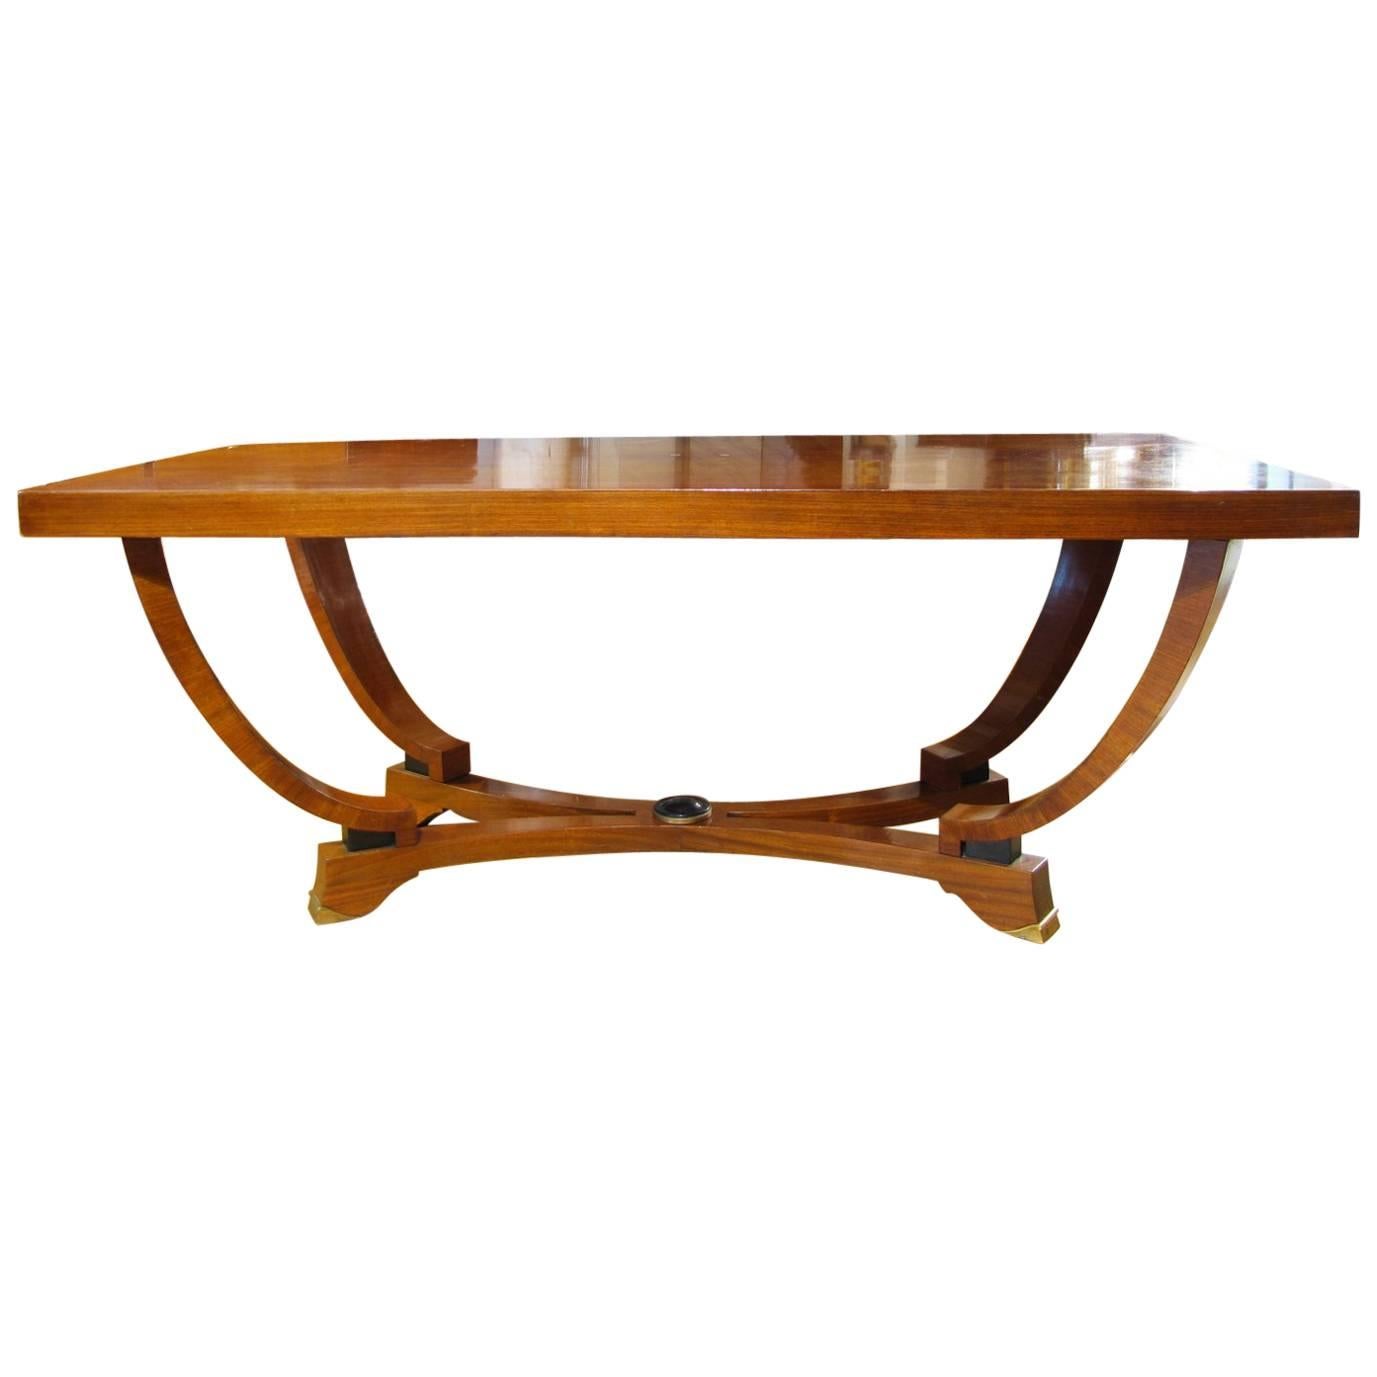 20th Century Italian Art Deco Extendable Dining Table in Walnut Wood For Sale